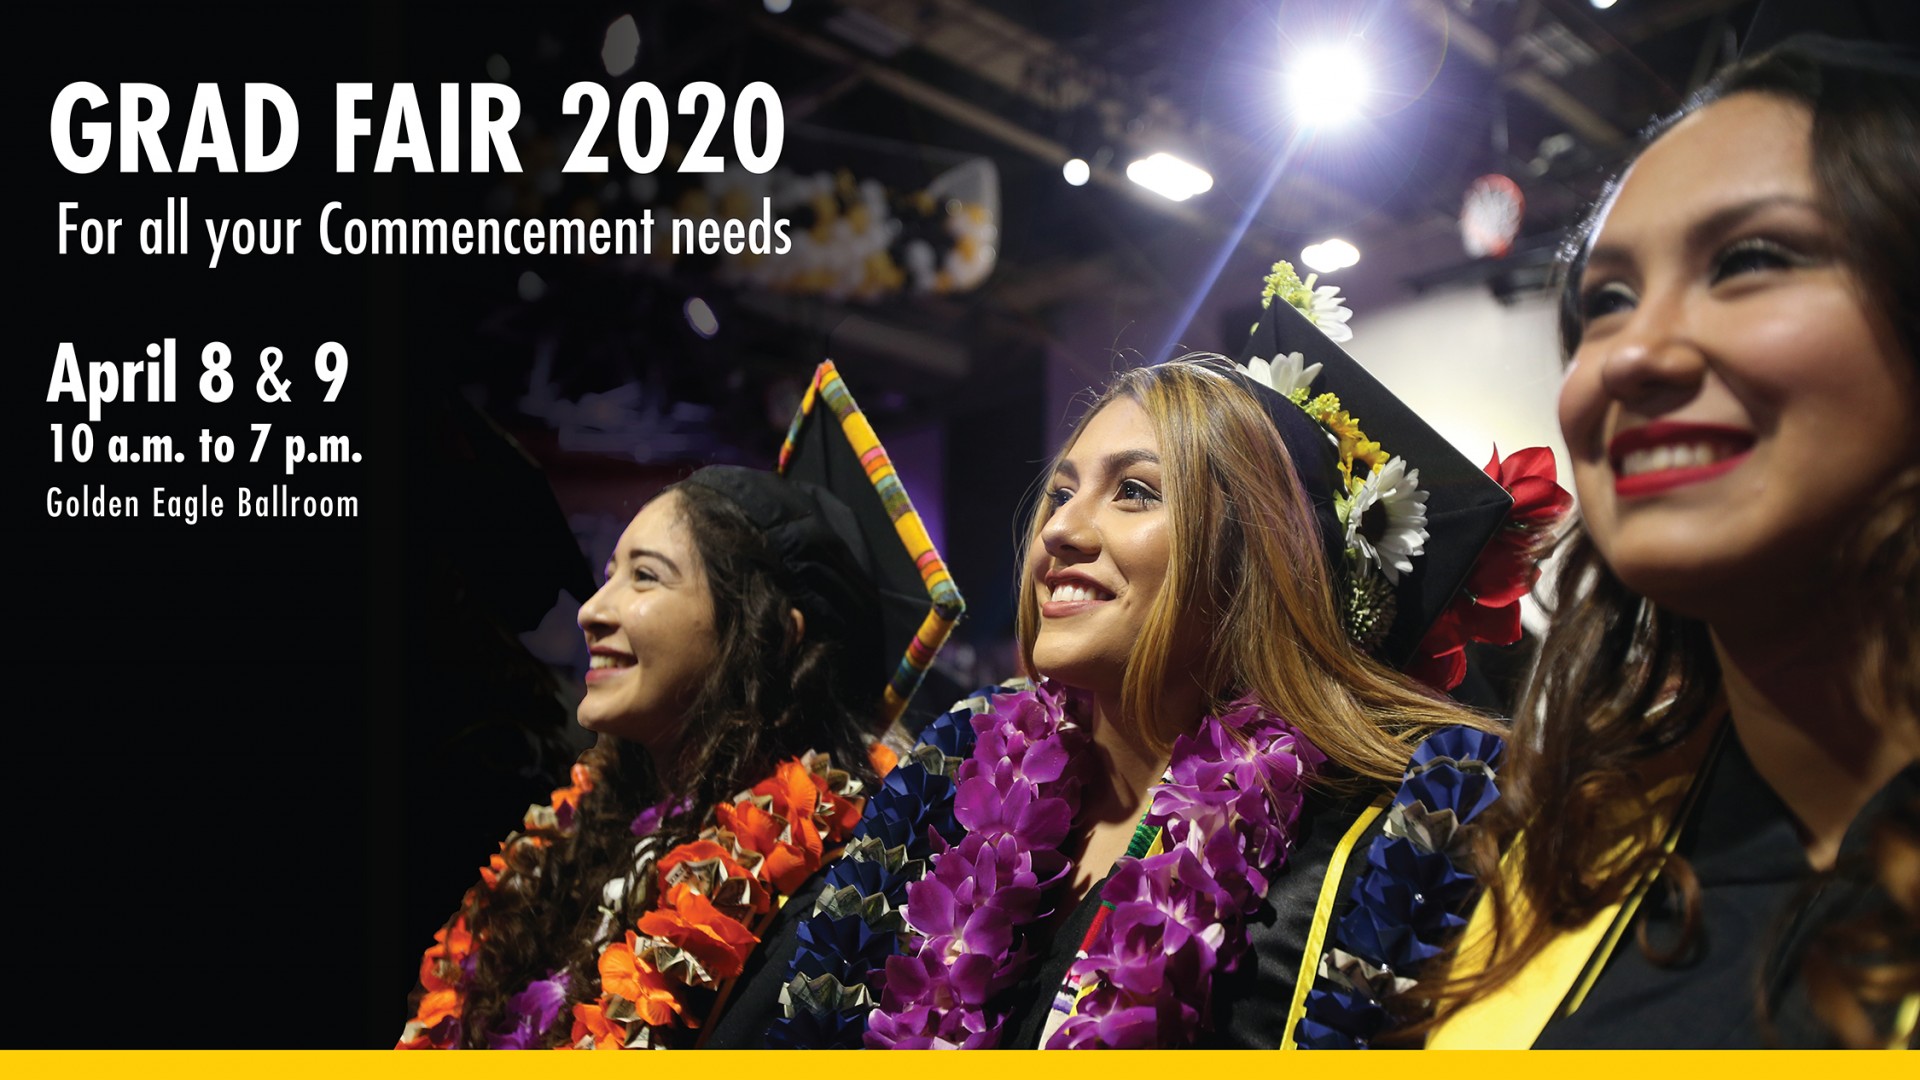 Banner with three female graduates smiling. text states "Grad Fair 2020 for all your Commencement needs. April 8 and 9, 10 a.m. to 7 p.m., Golden Eagle Ballroom